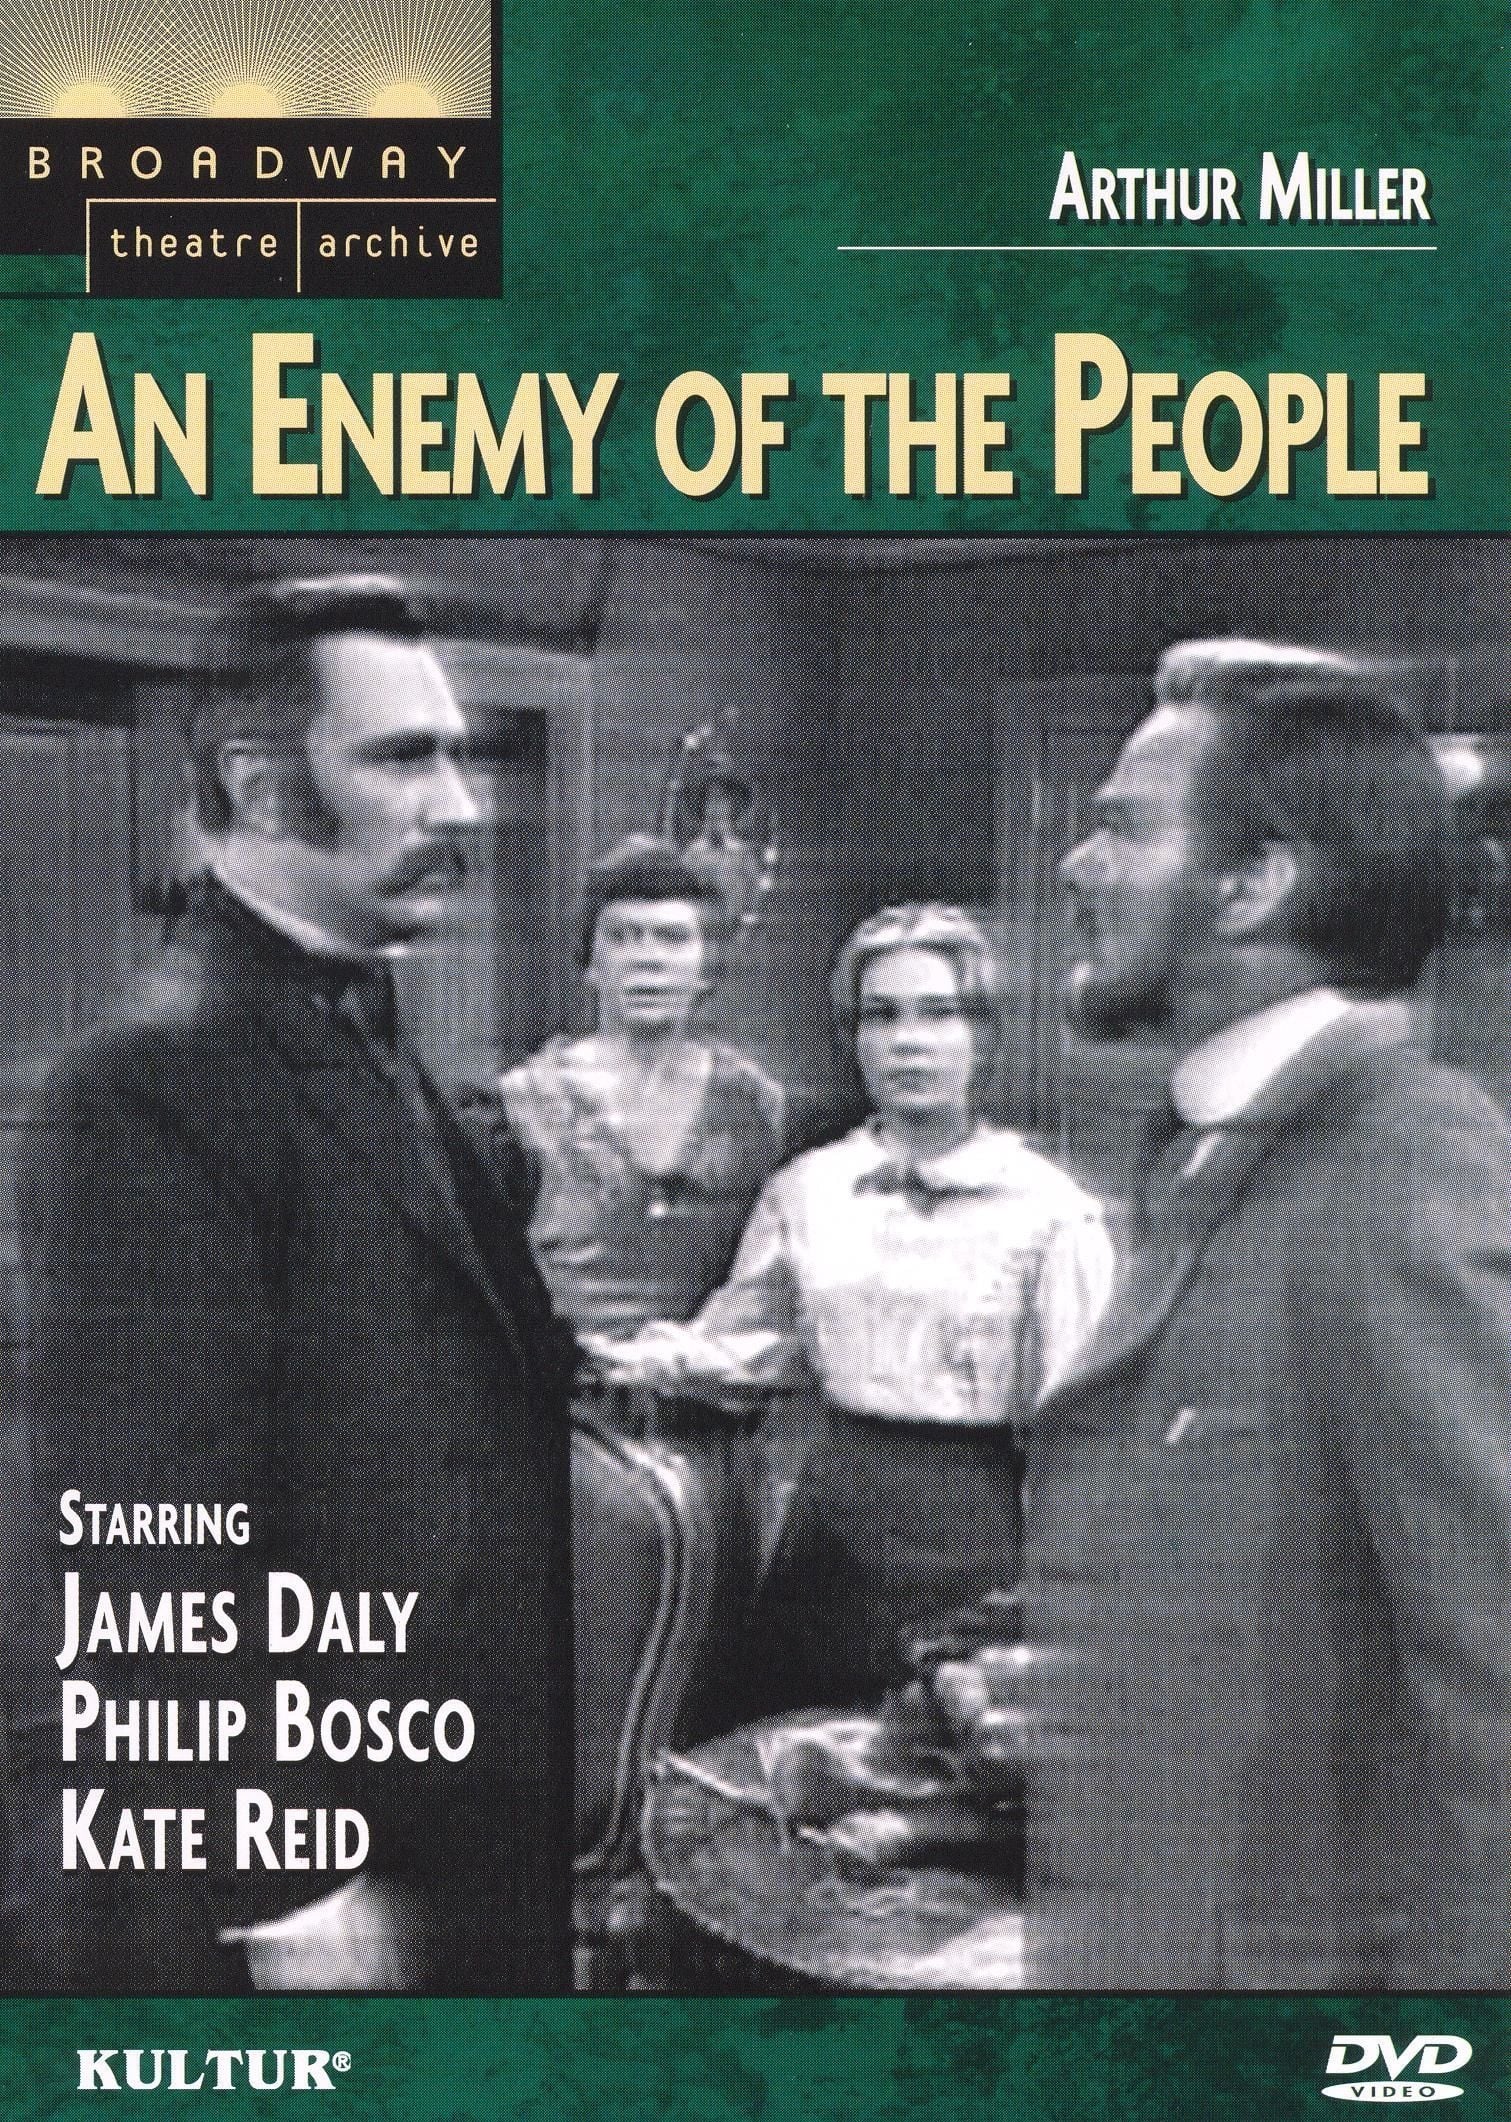 An Enemy of the People (1966)